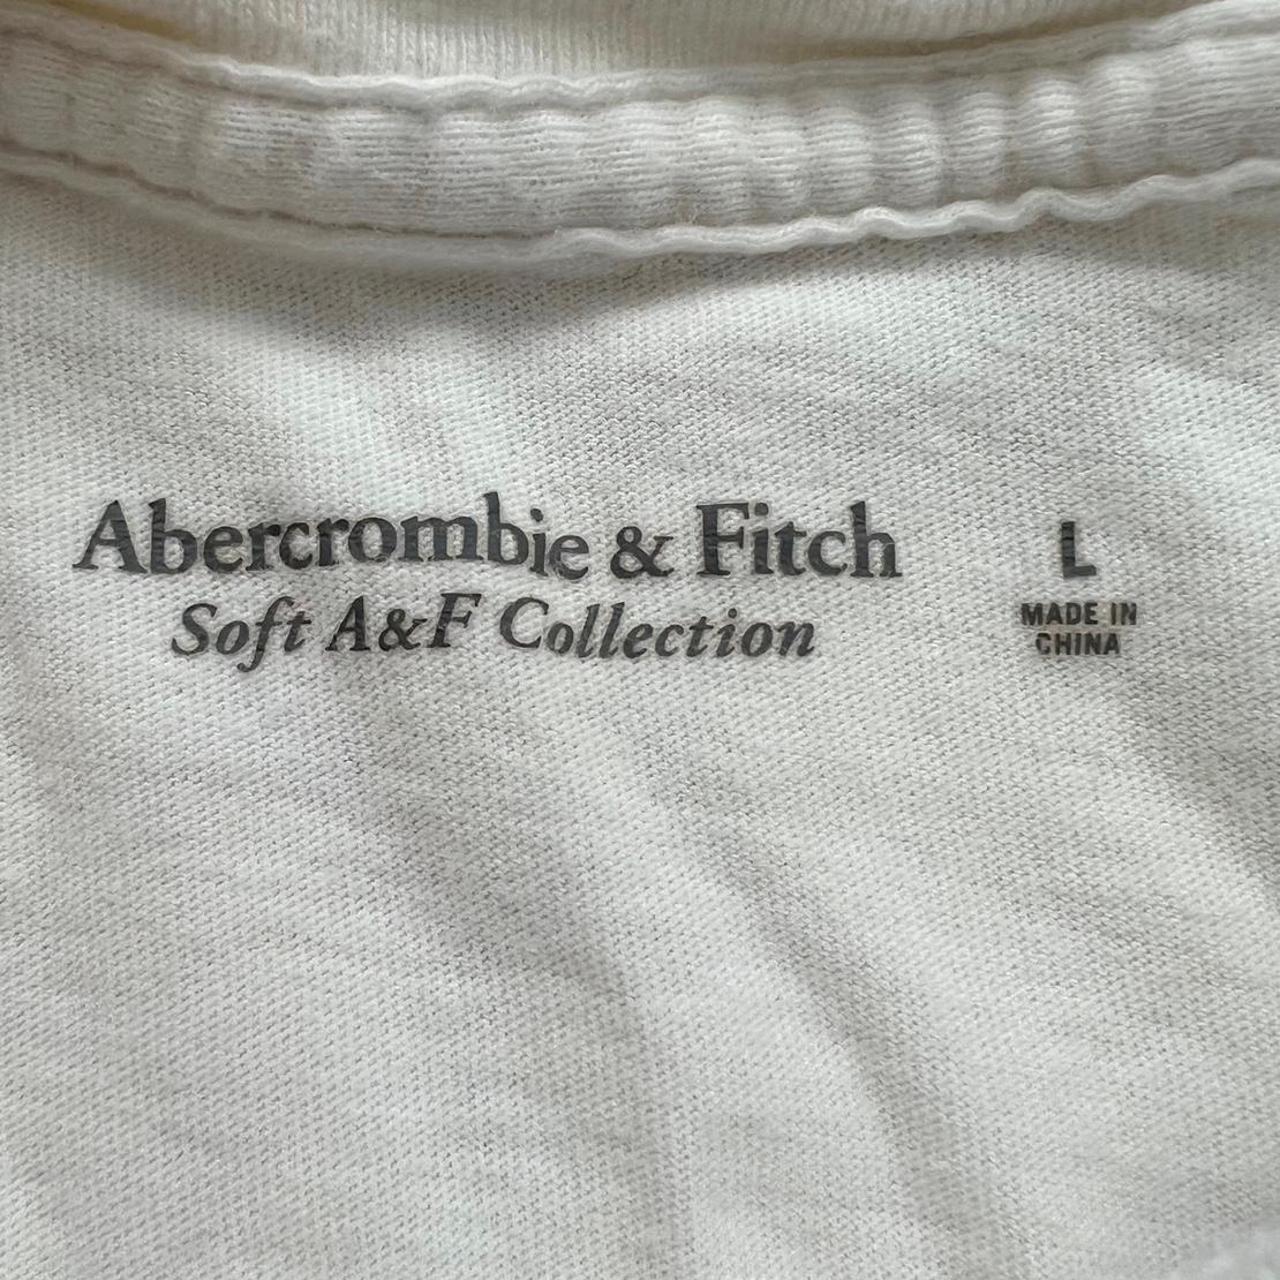 Abercrombie & Fitch Women's White and Yellow T-shirt | Depop